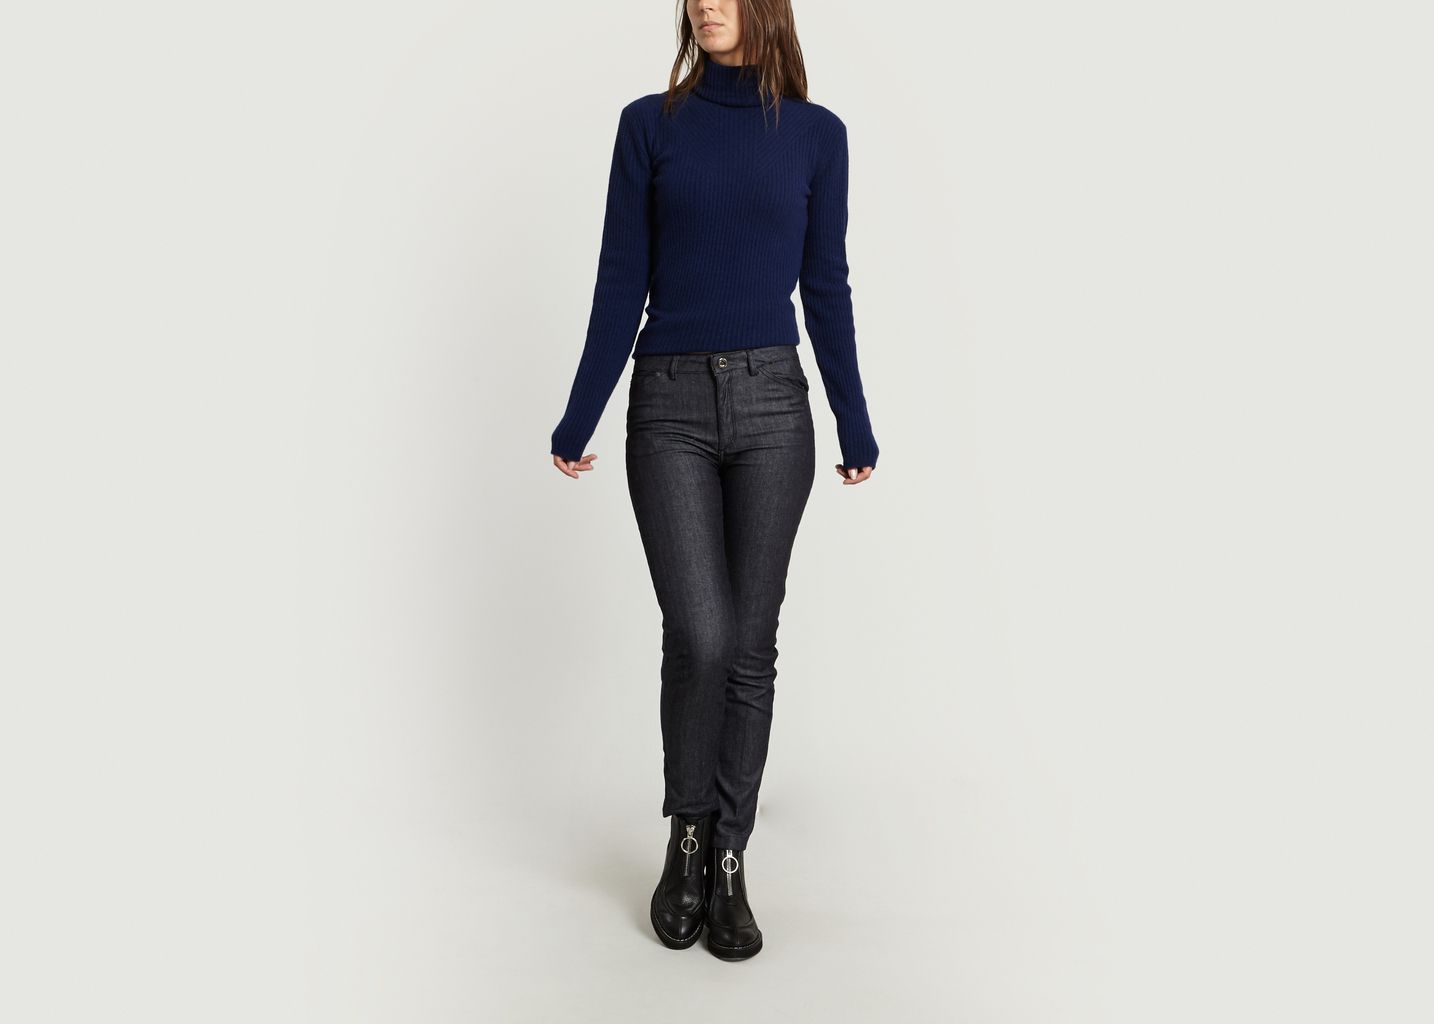 Classic Jeans - Cacharel